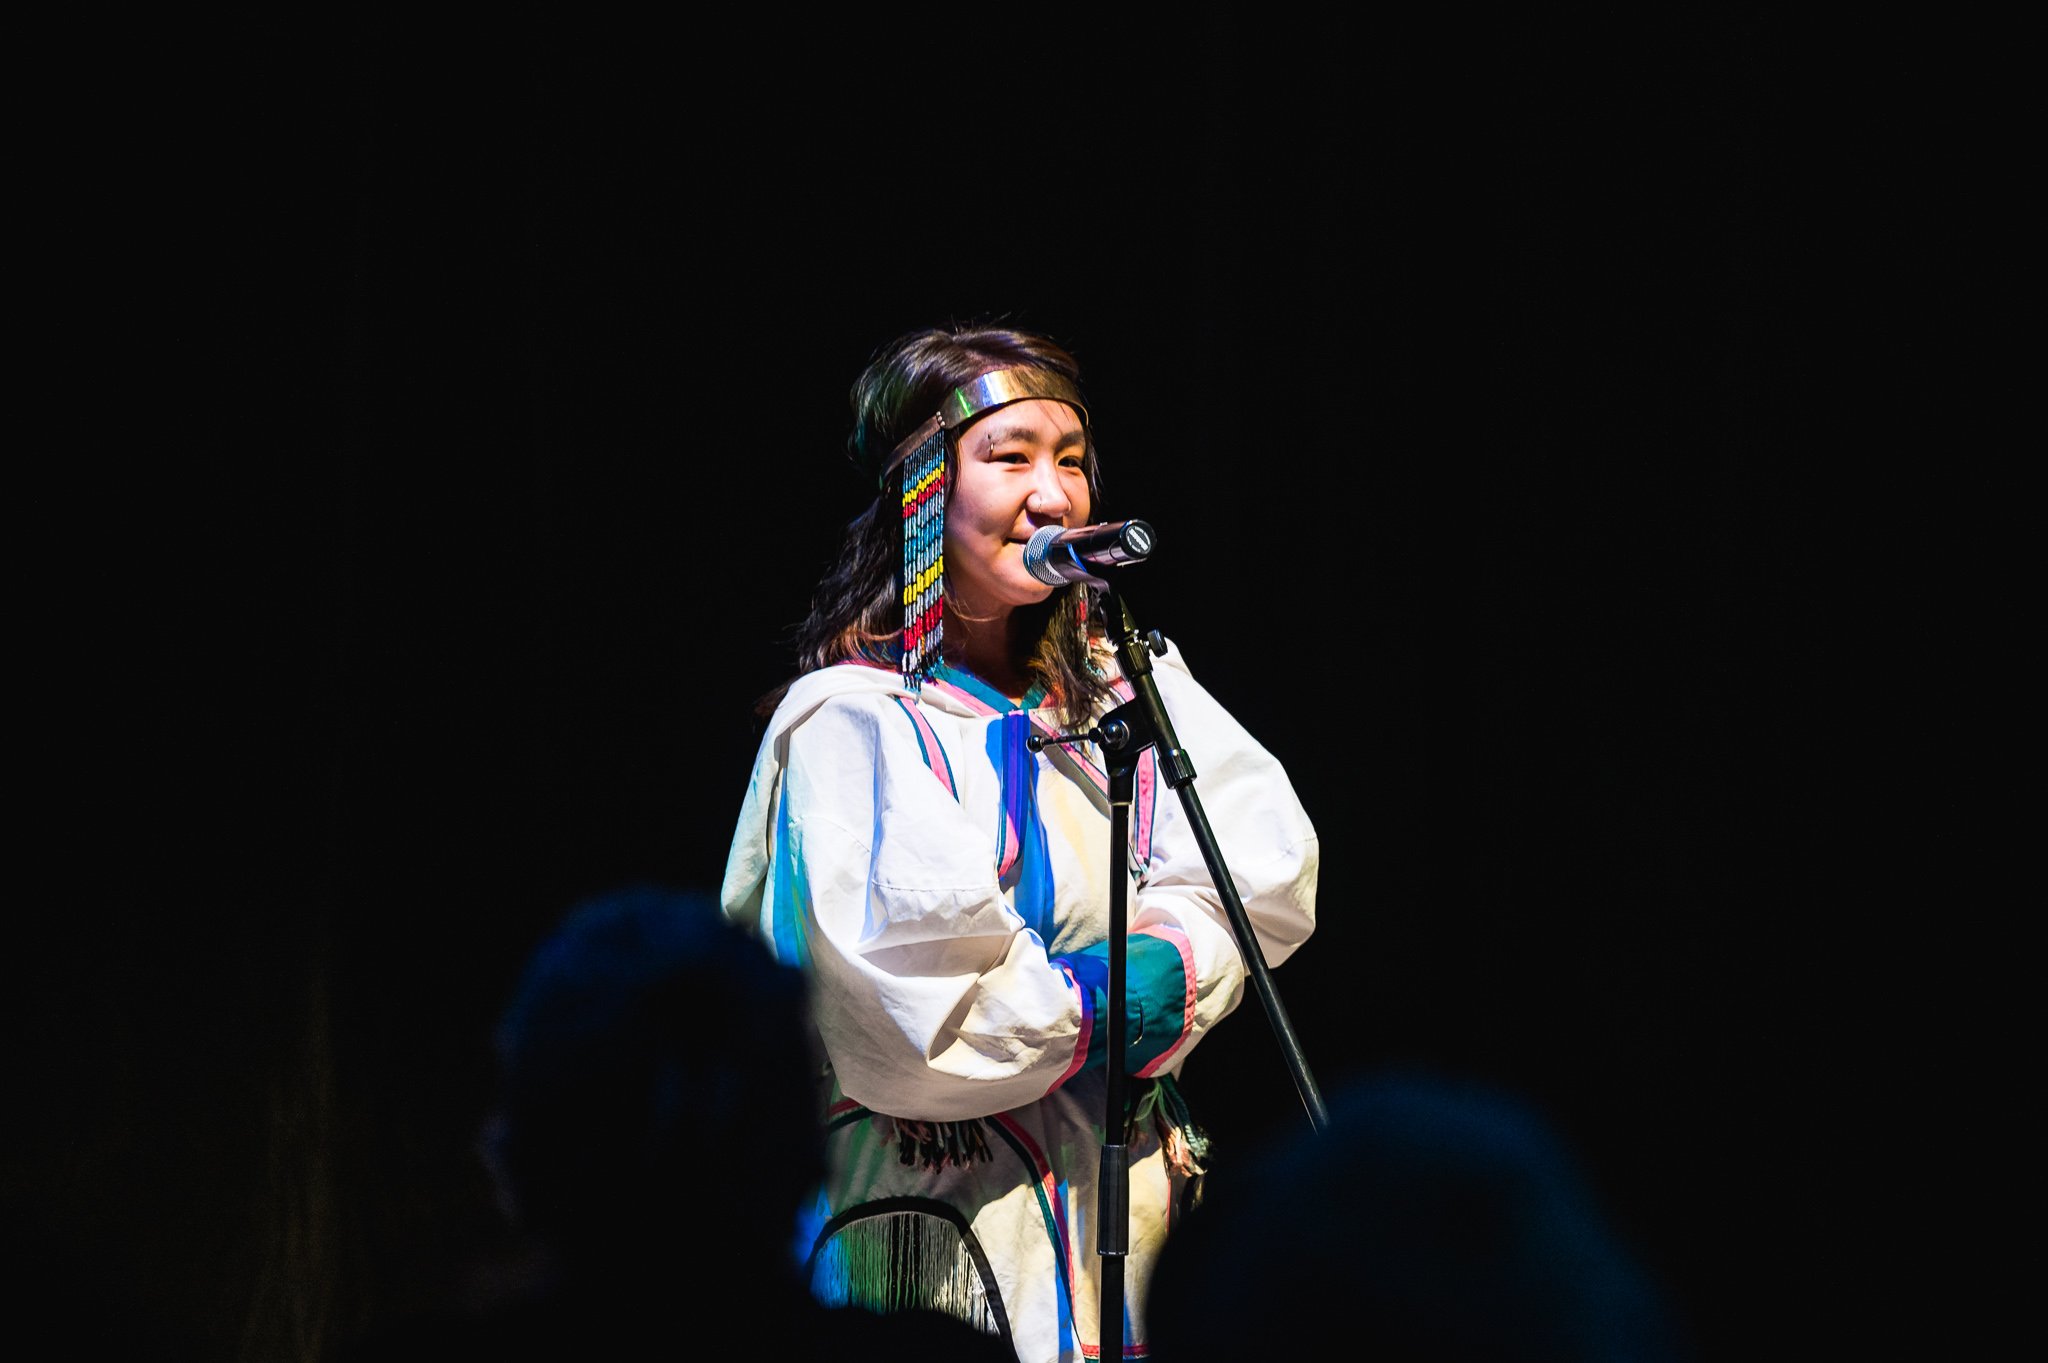 A performer at the Welcome Gathering at the 2022 imagineNATIVE Film + Media Arts Festival in the Daniels Spectrum Ada Slaight Hall. Image by David Coulson.